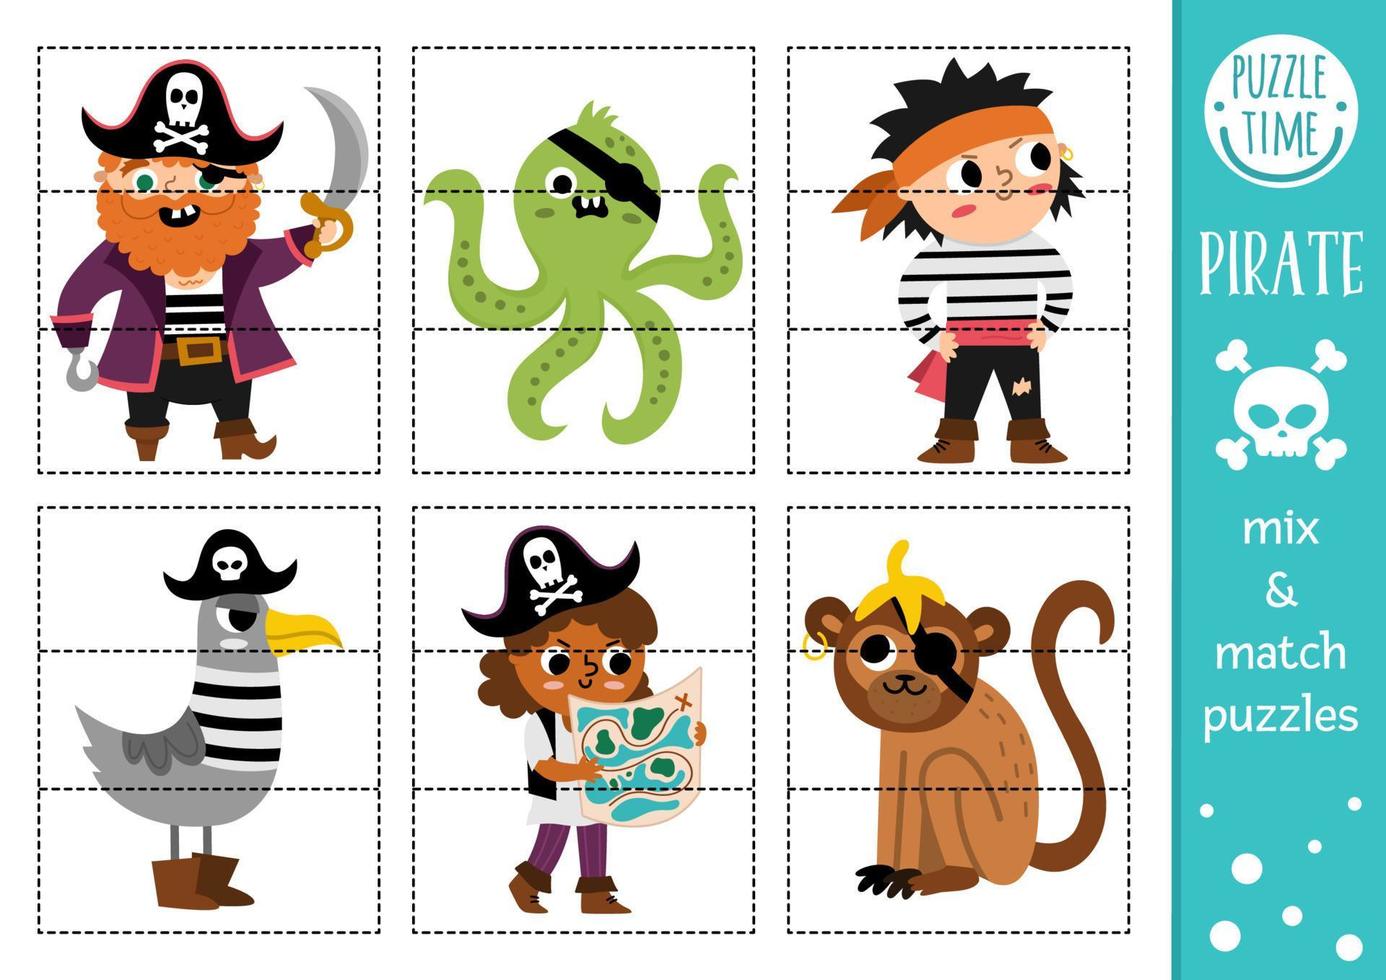 Vector pirate mix and match puzzle with cute characters. Matching treasure island activity for preschool kids. Educational sea adventure printable game with sailor, octopus, monkey, seagull.